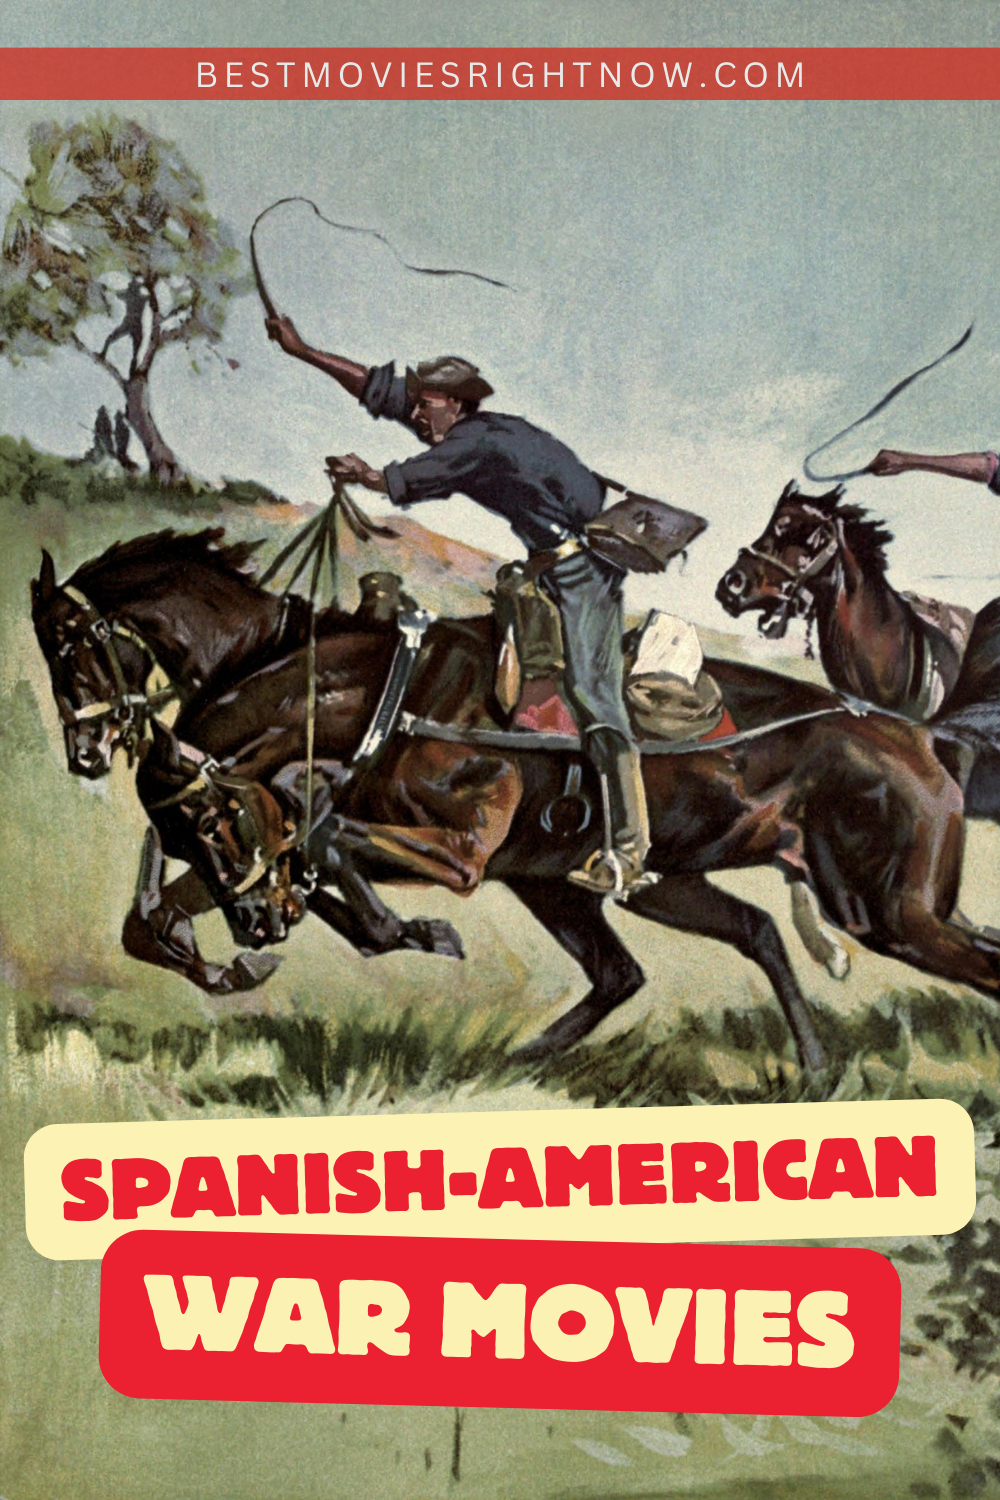 Spanish-American War, during the Siege of Santiago with text: "Spanish-American War Movies"